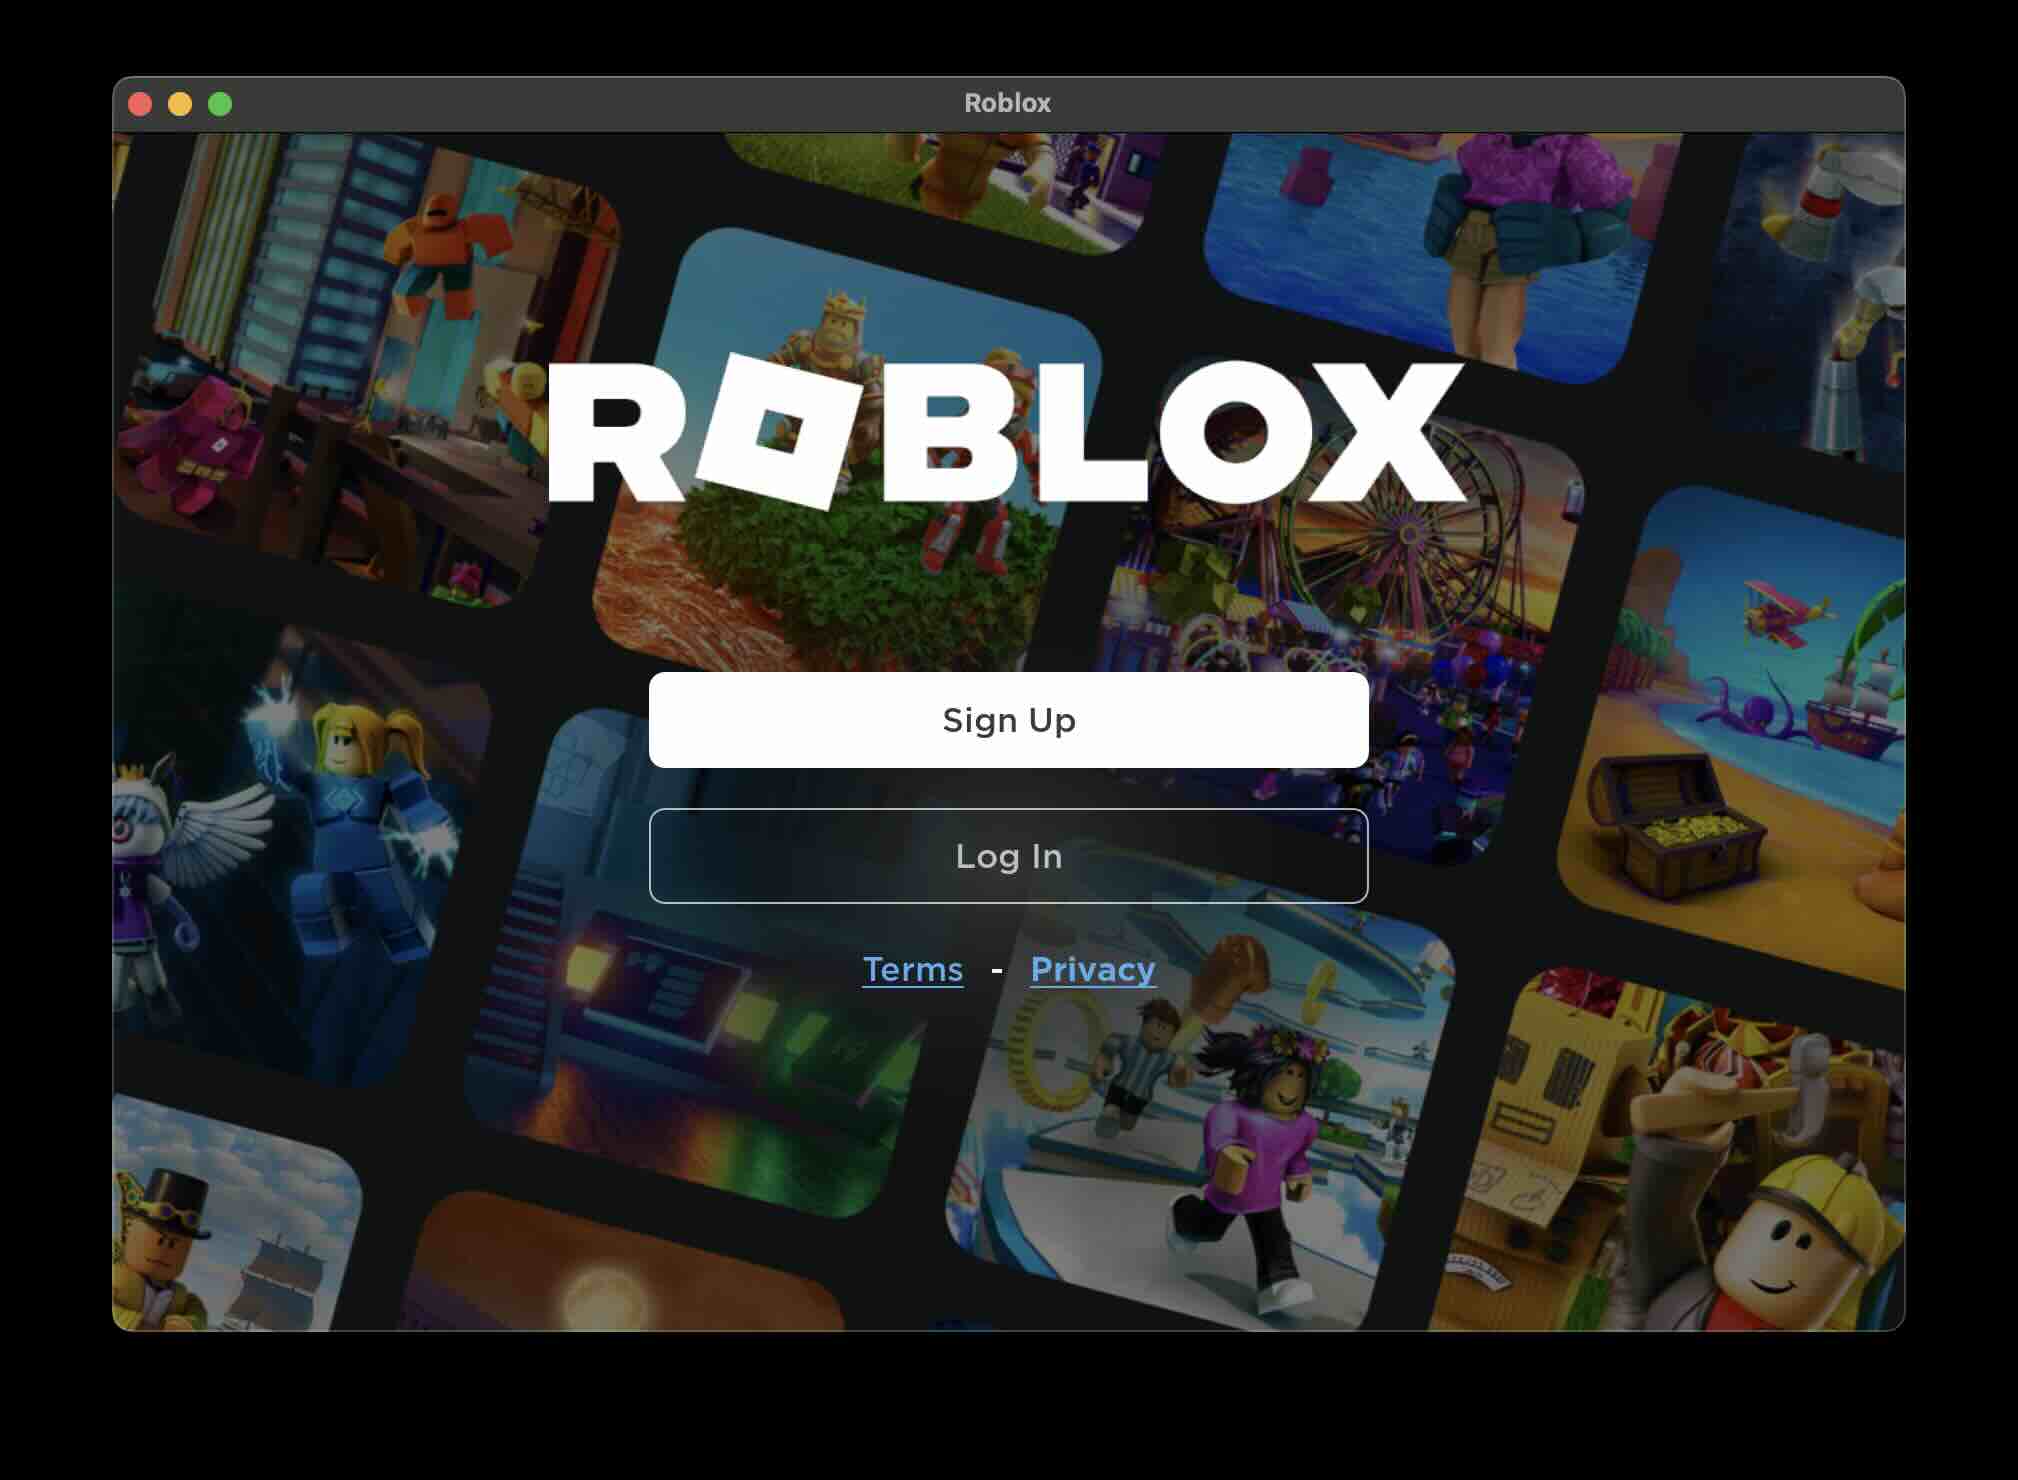 Roblox Game Sign Up Page on Mac